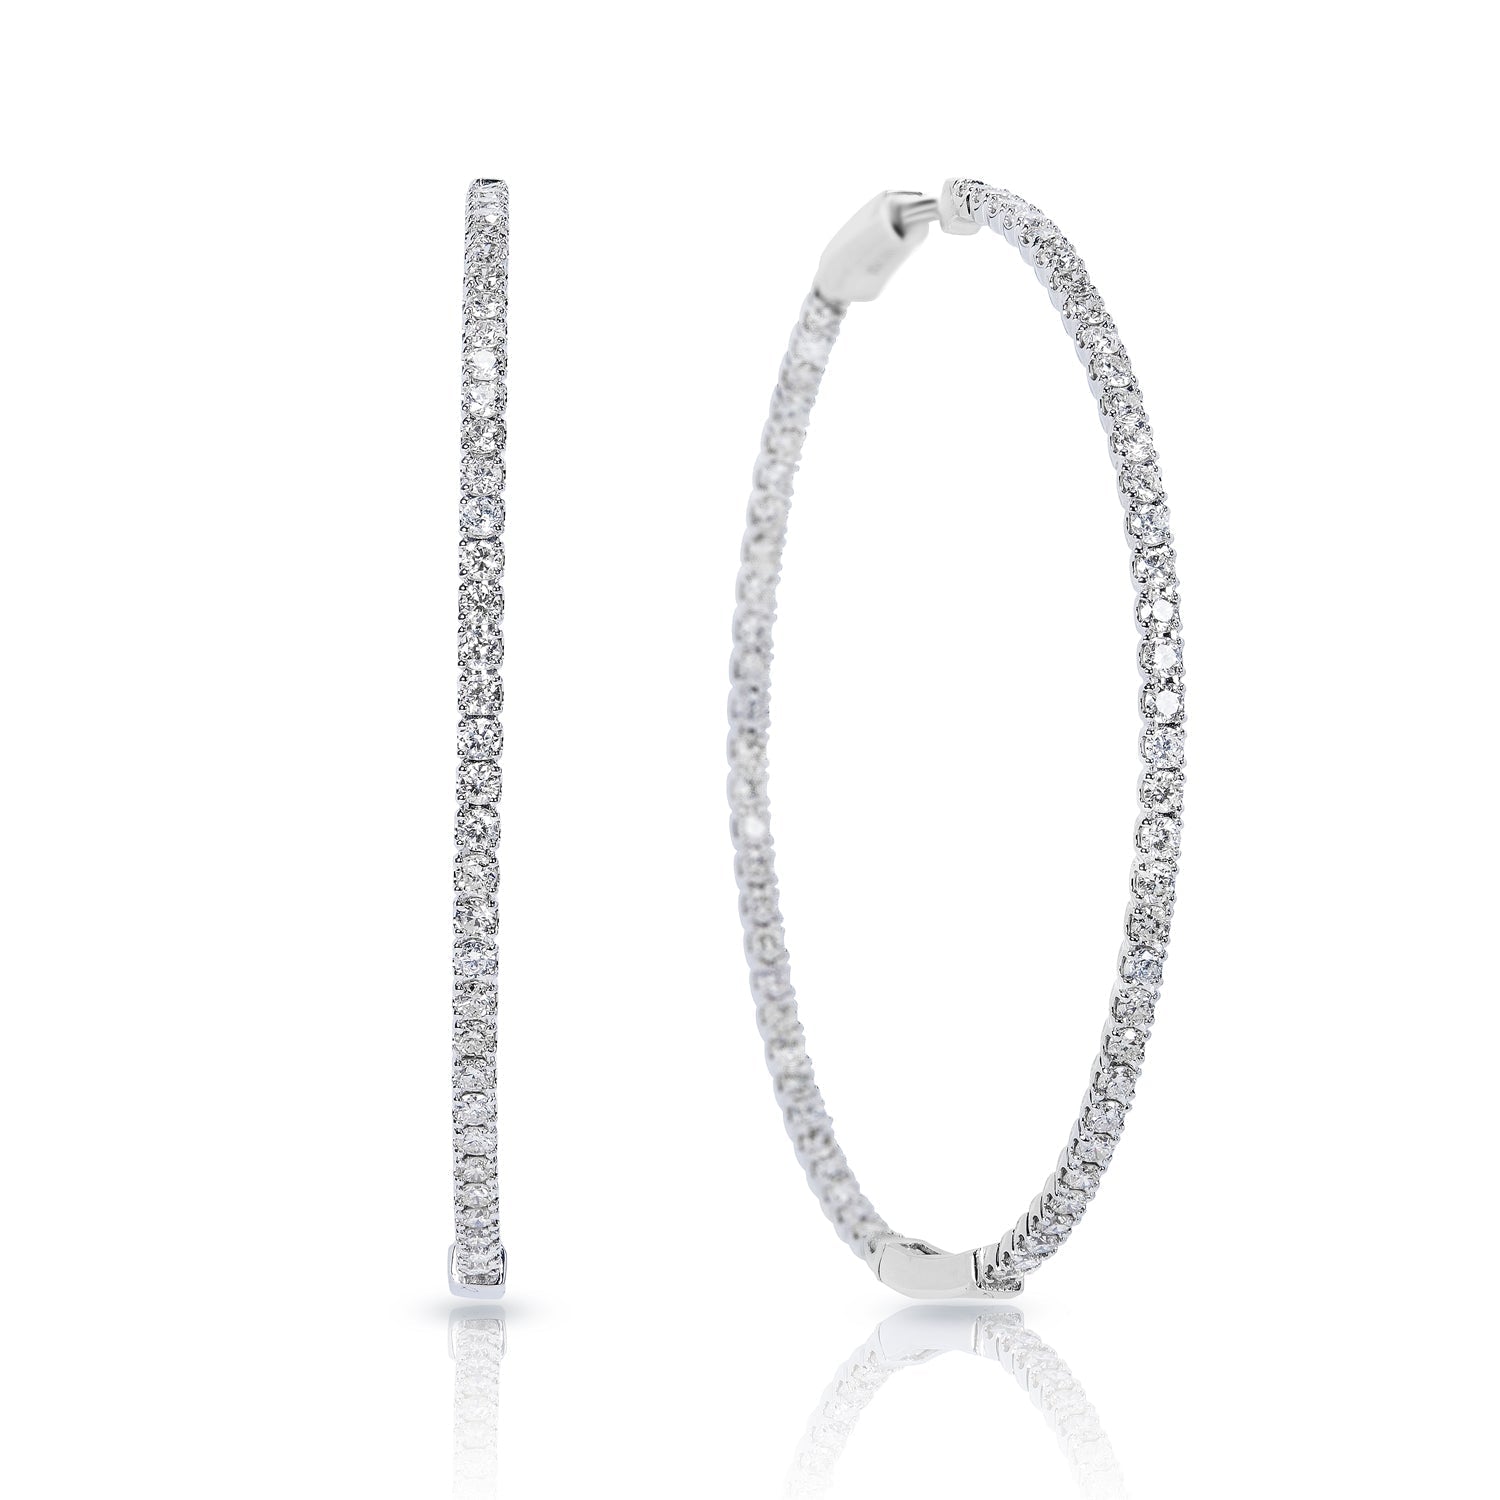 Kylee 4 Carat Round Brilliant Diamond 56 mm Hoop Earrings Front and Side View